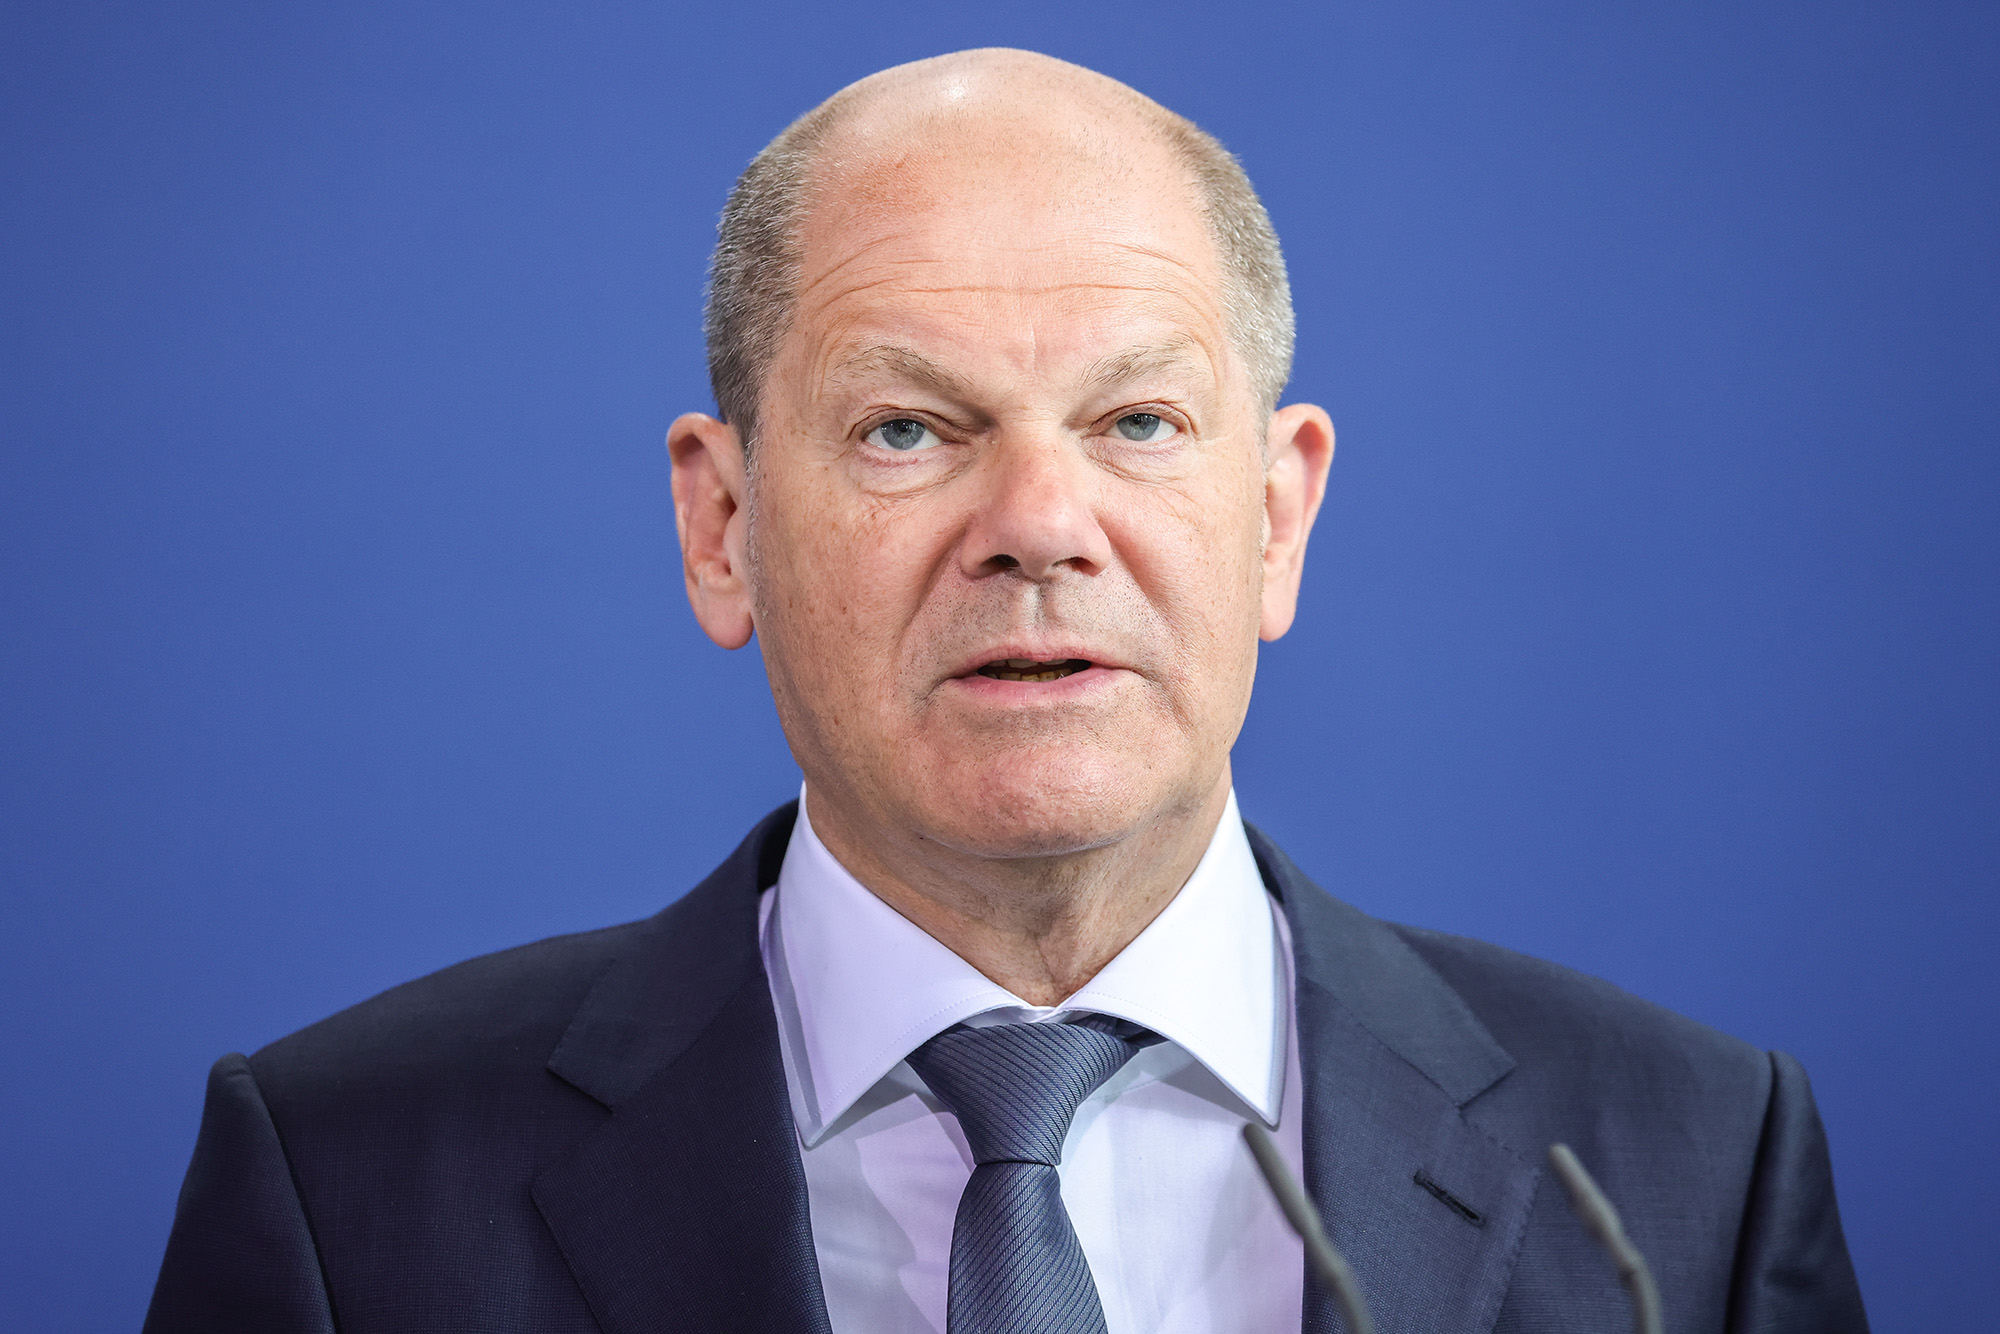 German Chancellor Olaf Scholz attends a press conference at the Chancellery on May 4, in Berlin, Germany.